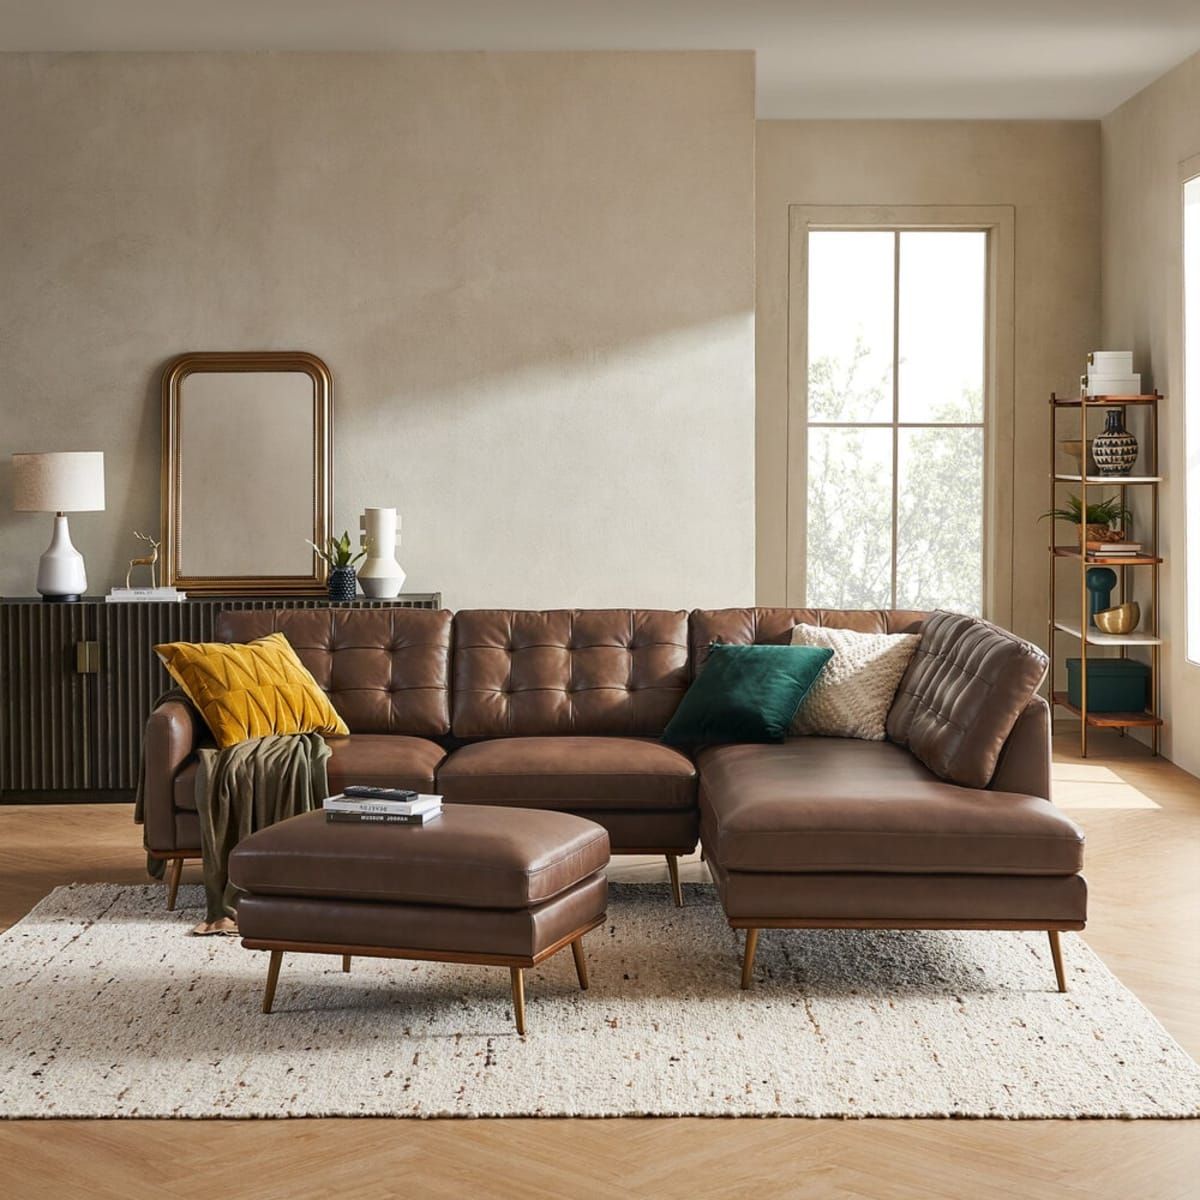 6 Colors That Go With Brown Leather Sofas | Castlery Us Within Sofas In Chocolate Brown (View 15 of 15)